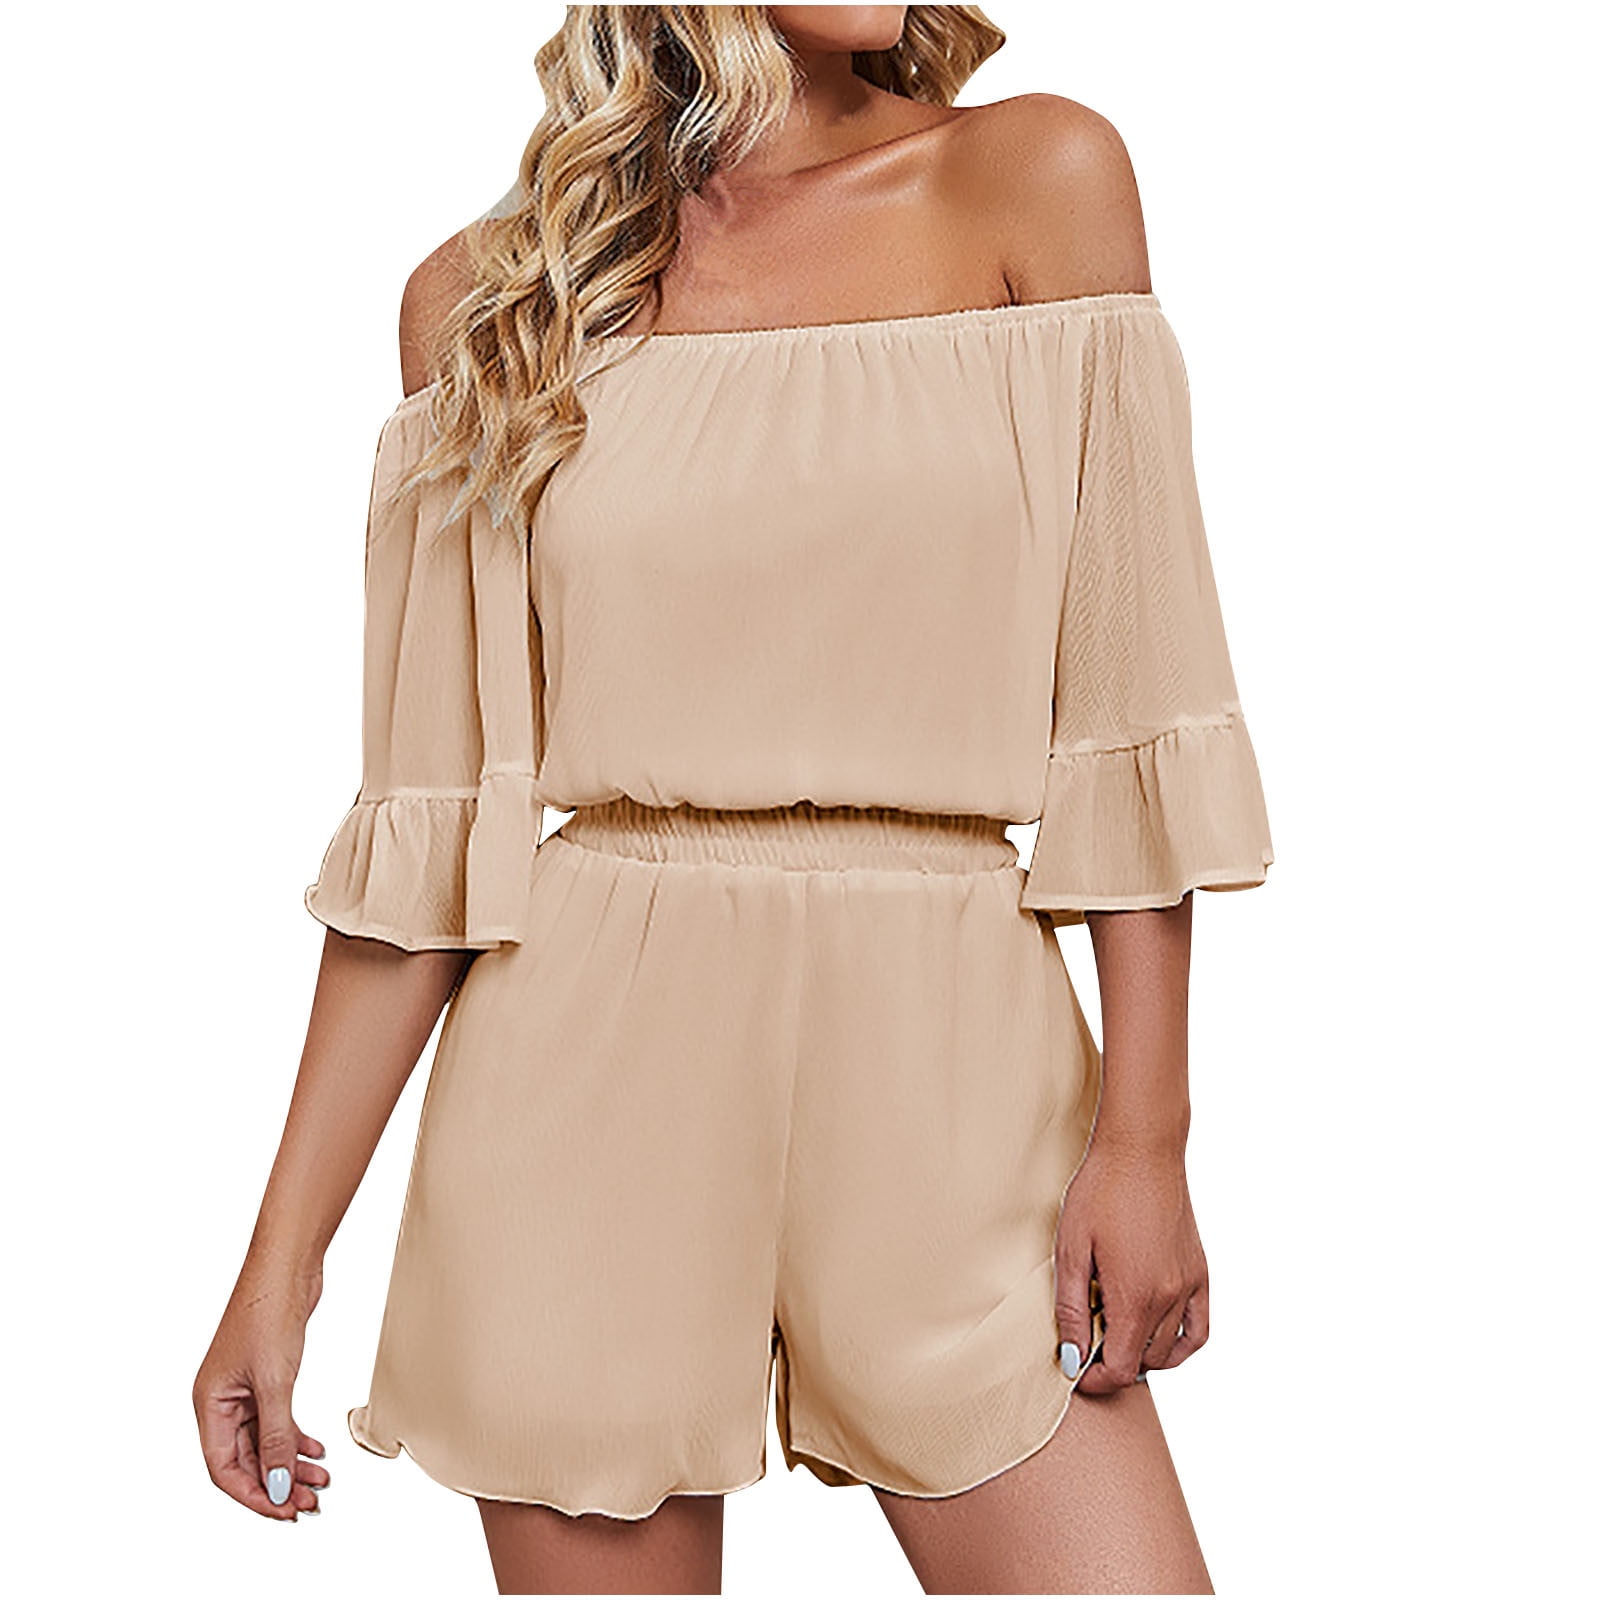 YWDJ Rompers for Women Short Flared Pants Ladies Travel